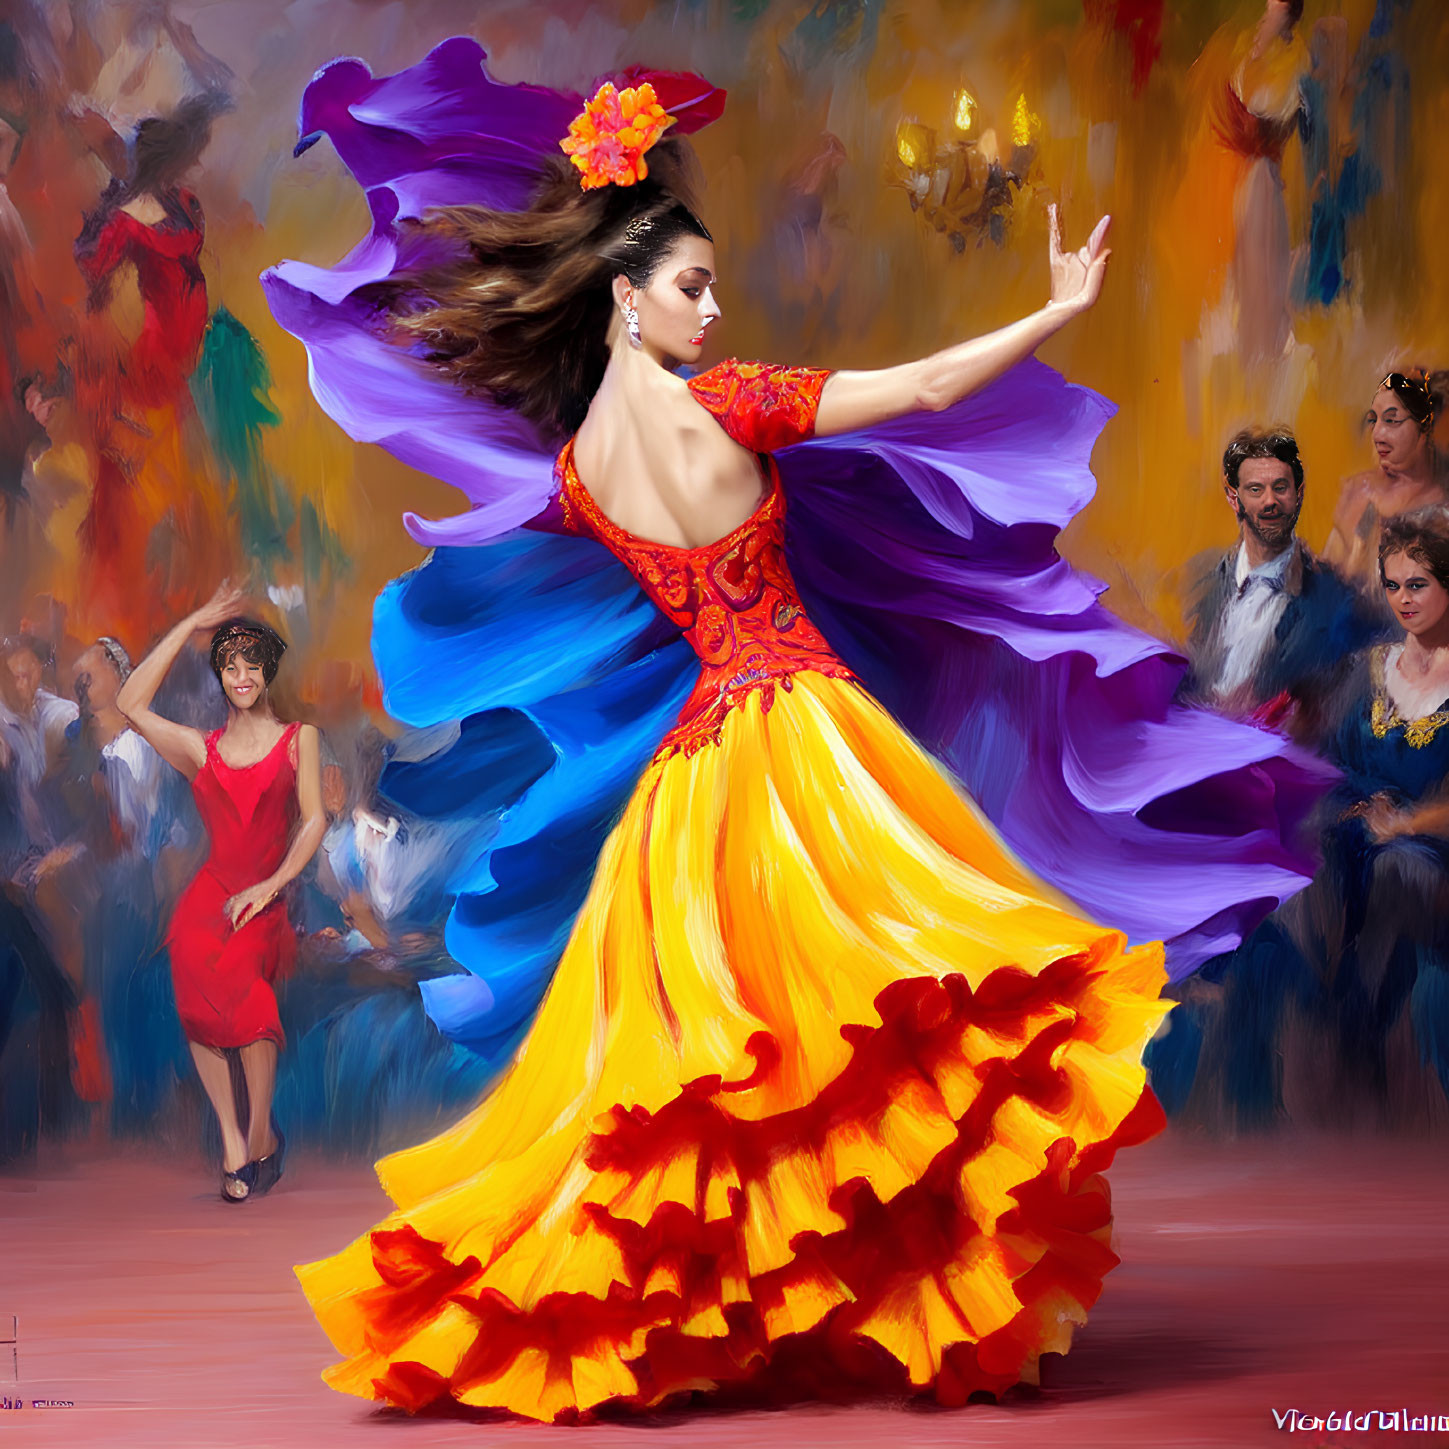 Vibrant yellow and red flamenco dancer with flowing purple train performs passionately